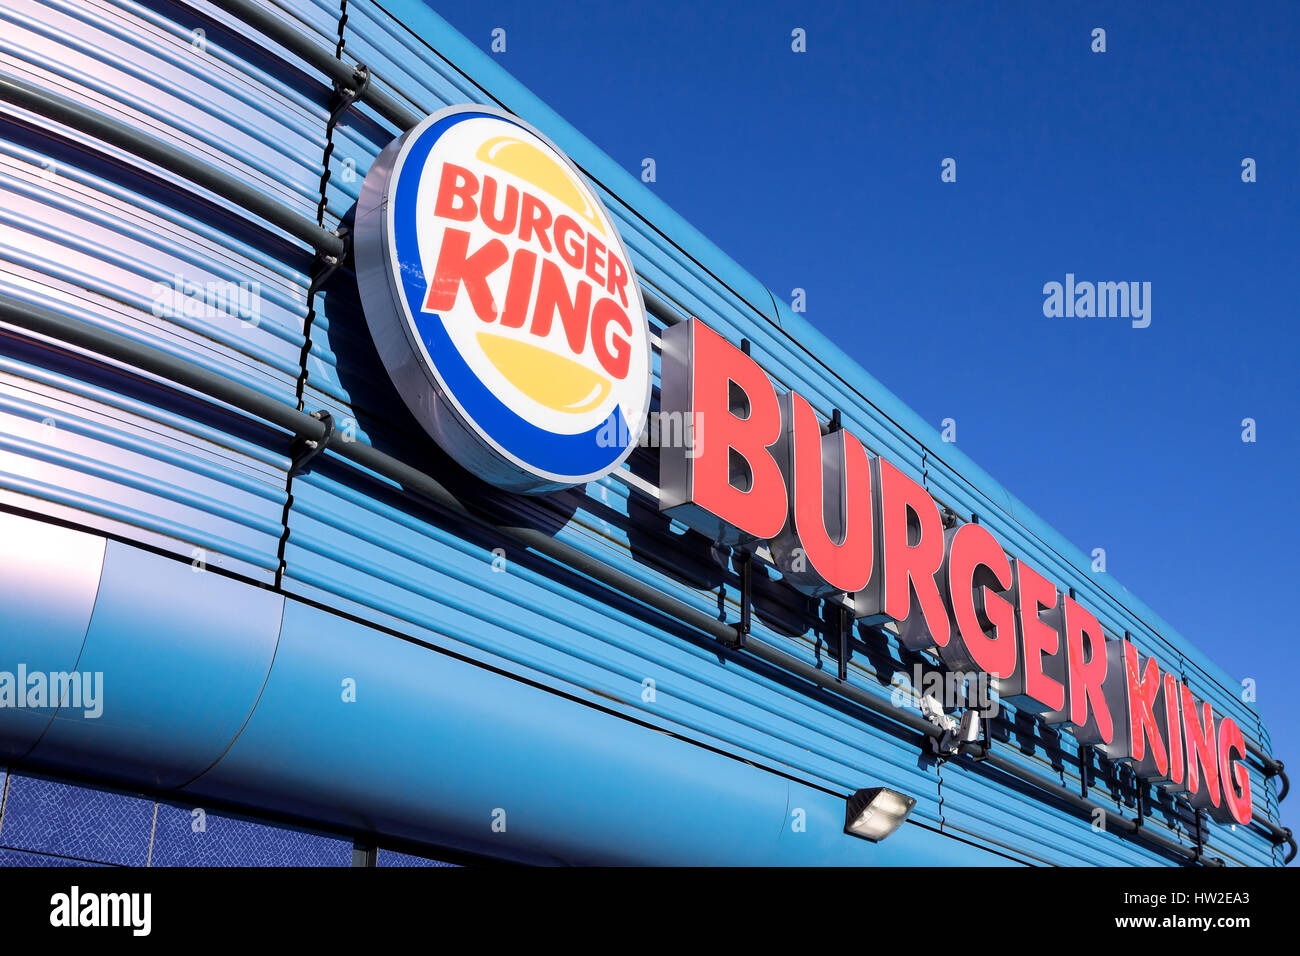 Burger King fast food restaurant.  Burger King is the second largest chain of hamburger fast food restaurants in terms of global locations. Stock Photo